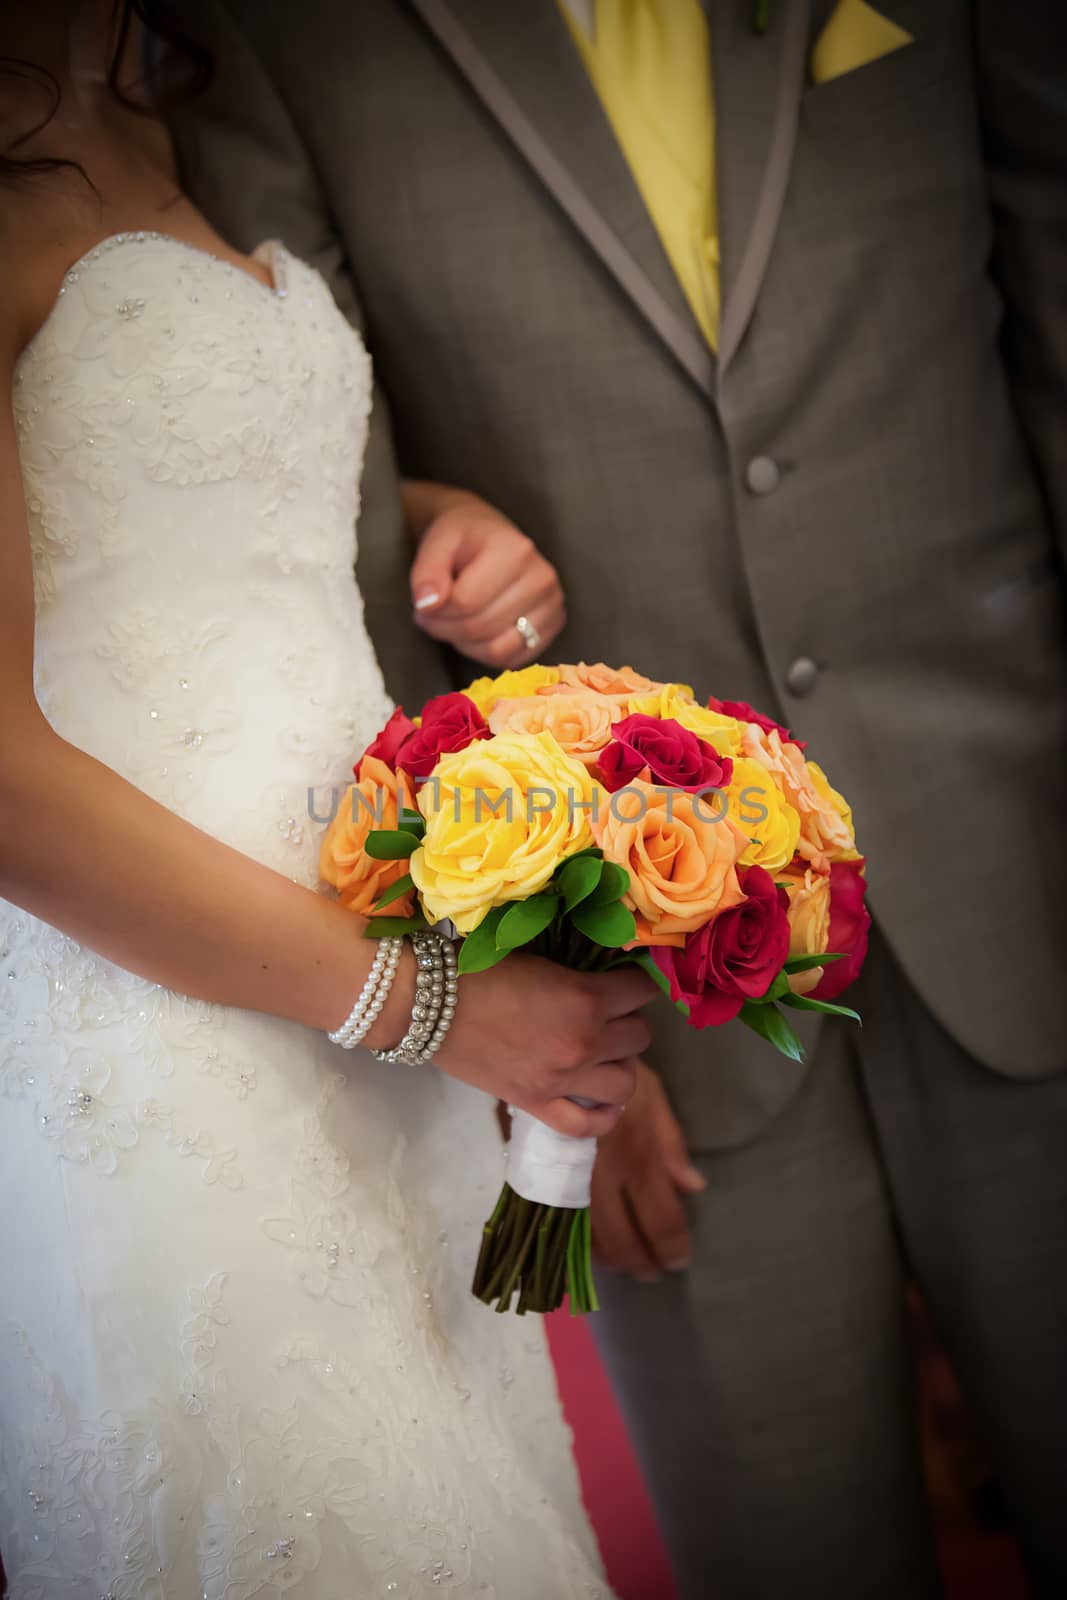 Bride and Groom Holding Colored Bouquet by salejandro